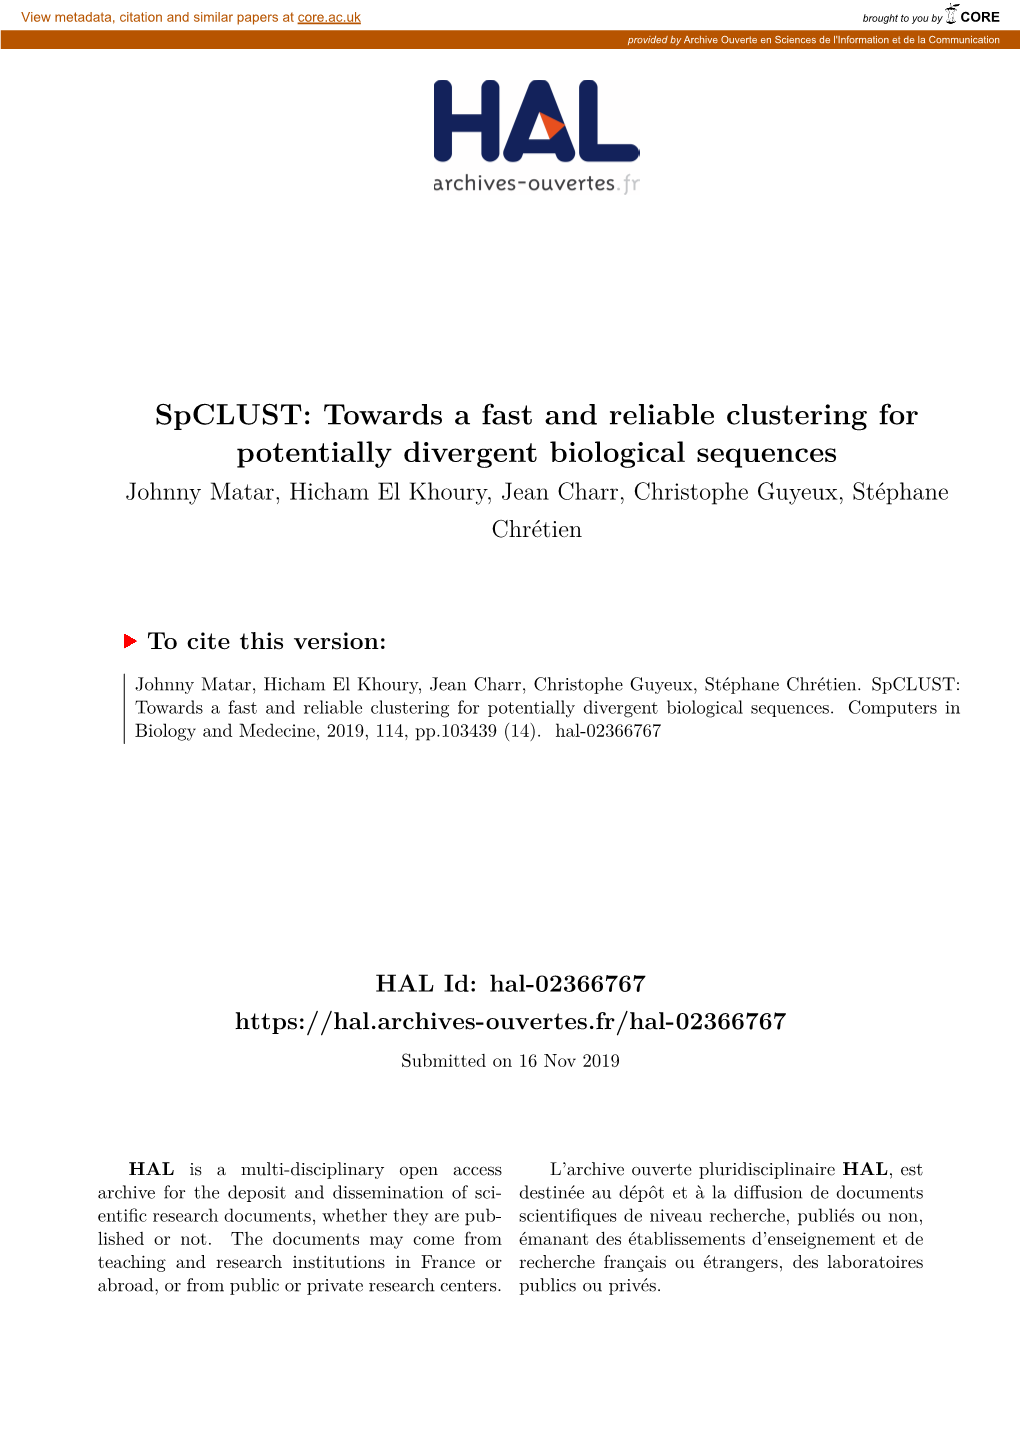 Spclust: Towards a Fast and Reliable Clustering for Potentially Divergent